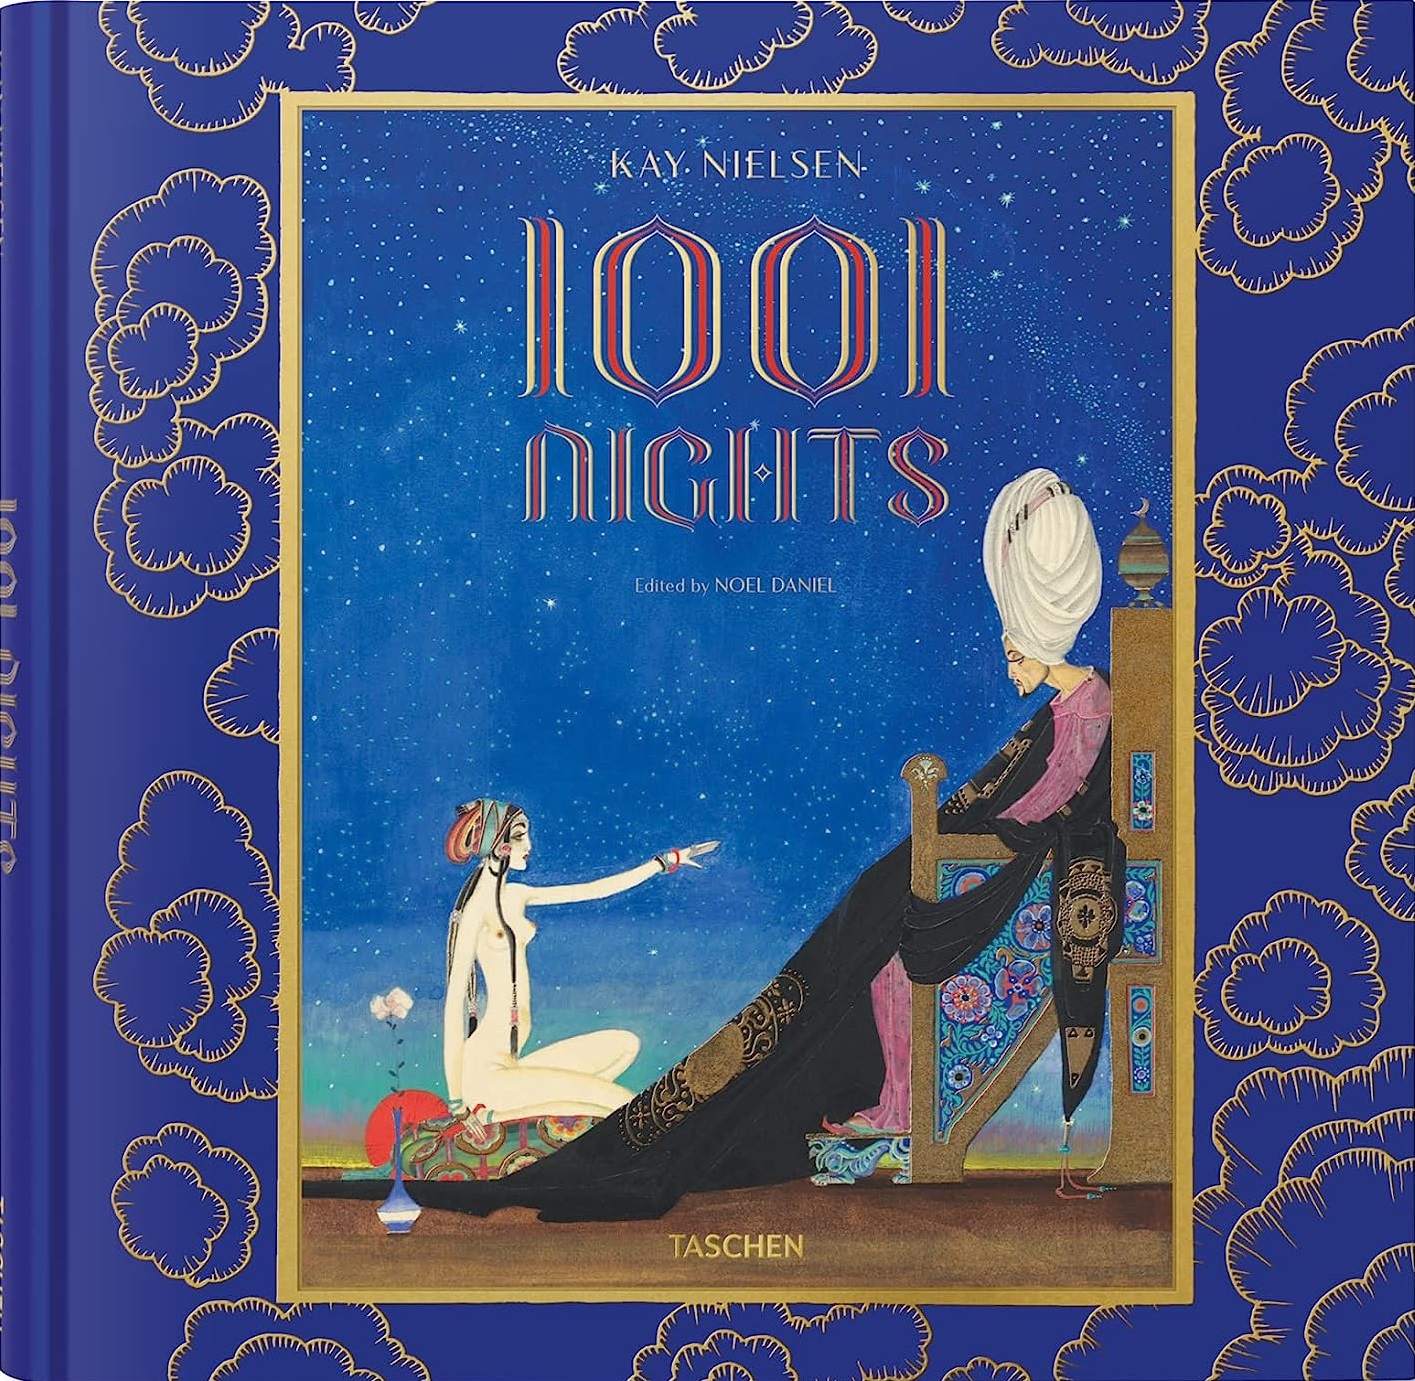 Kay Nielsen's A Thousand and One Nights (Multilingual Edition)